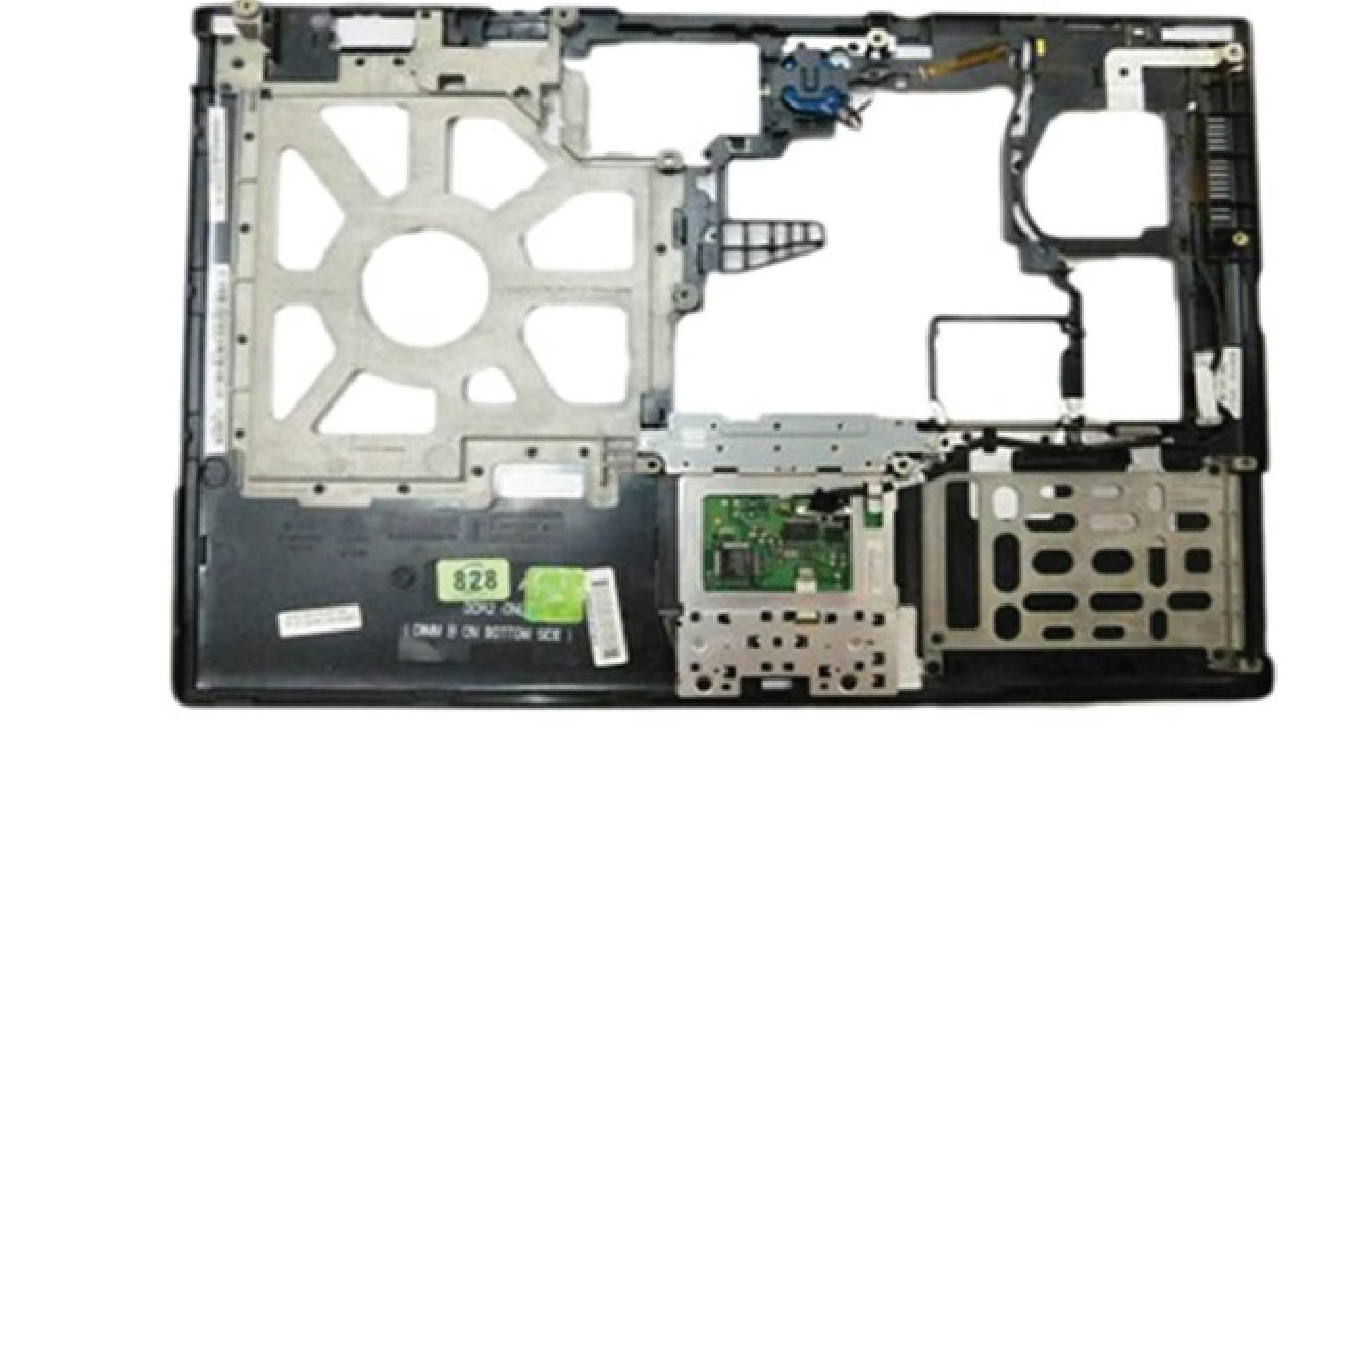 Dell OEM Latitude D620 Biometric Palmrest Touchpad Assembly with Fingerprint  Reader - CK133 - Royal Computer Solution